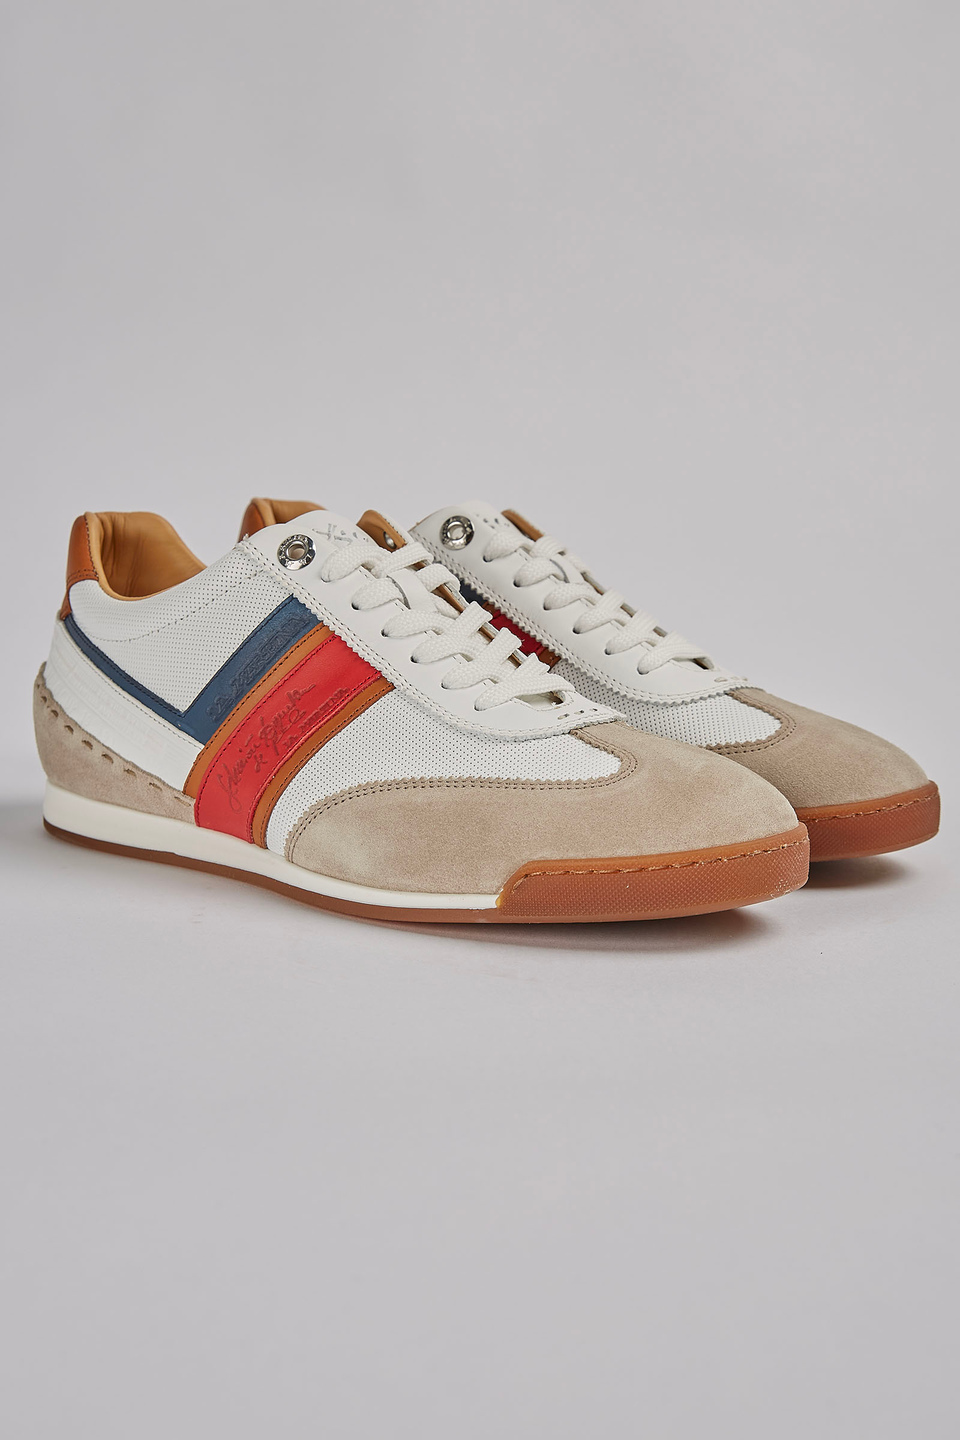 Mixed leather sneaker | La Martina - Official Online Shop